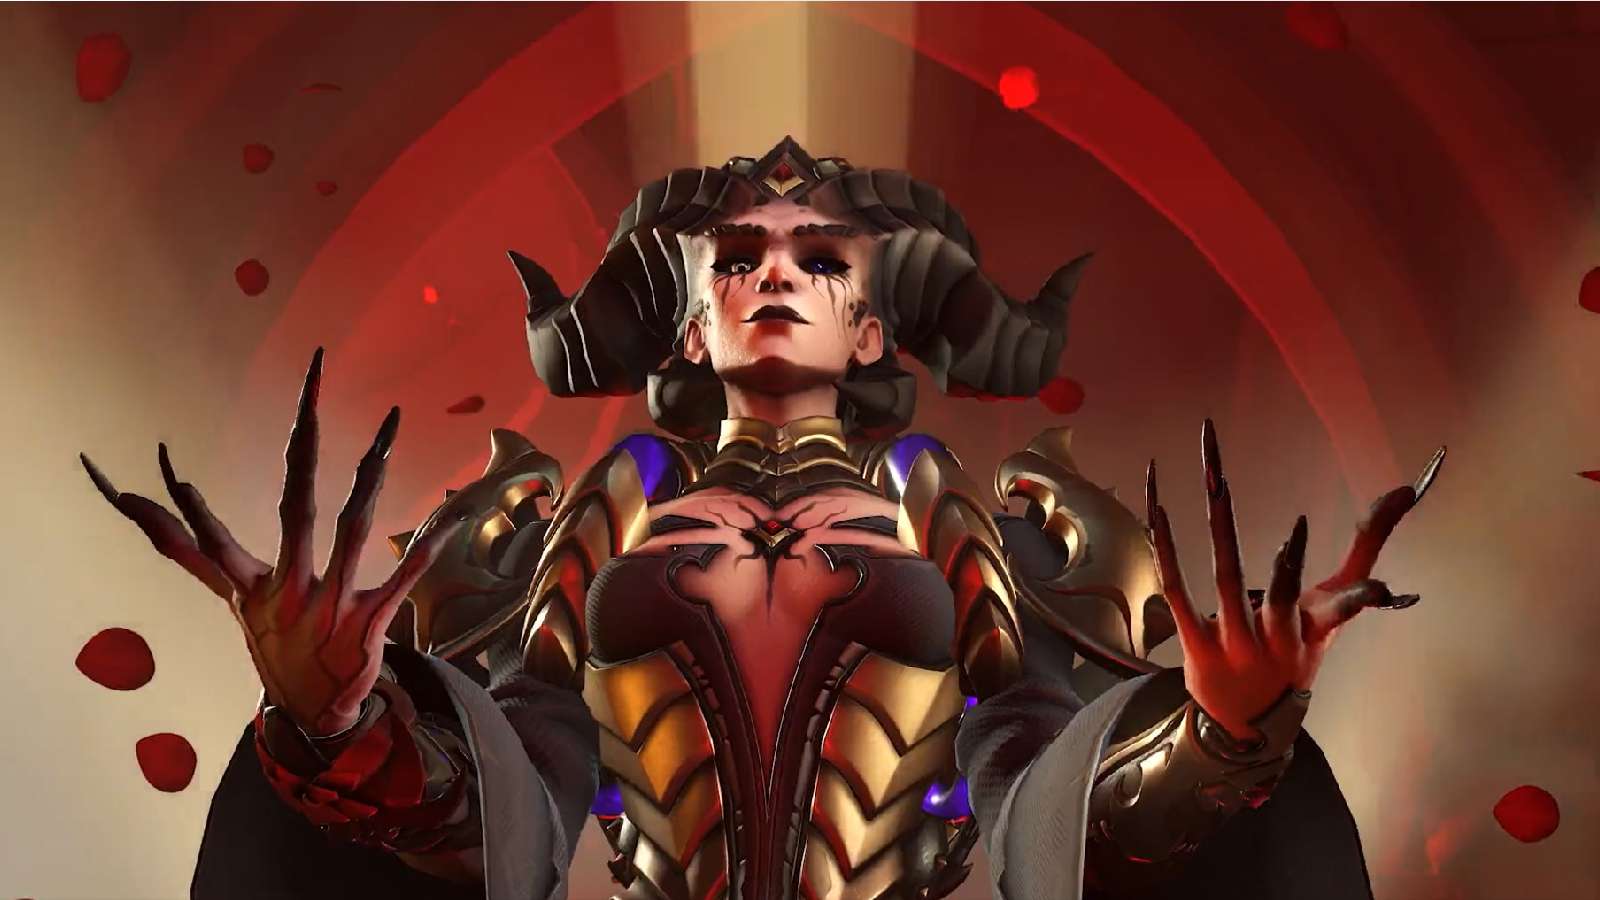 Lilith Moira skin in Overwatch 2